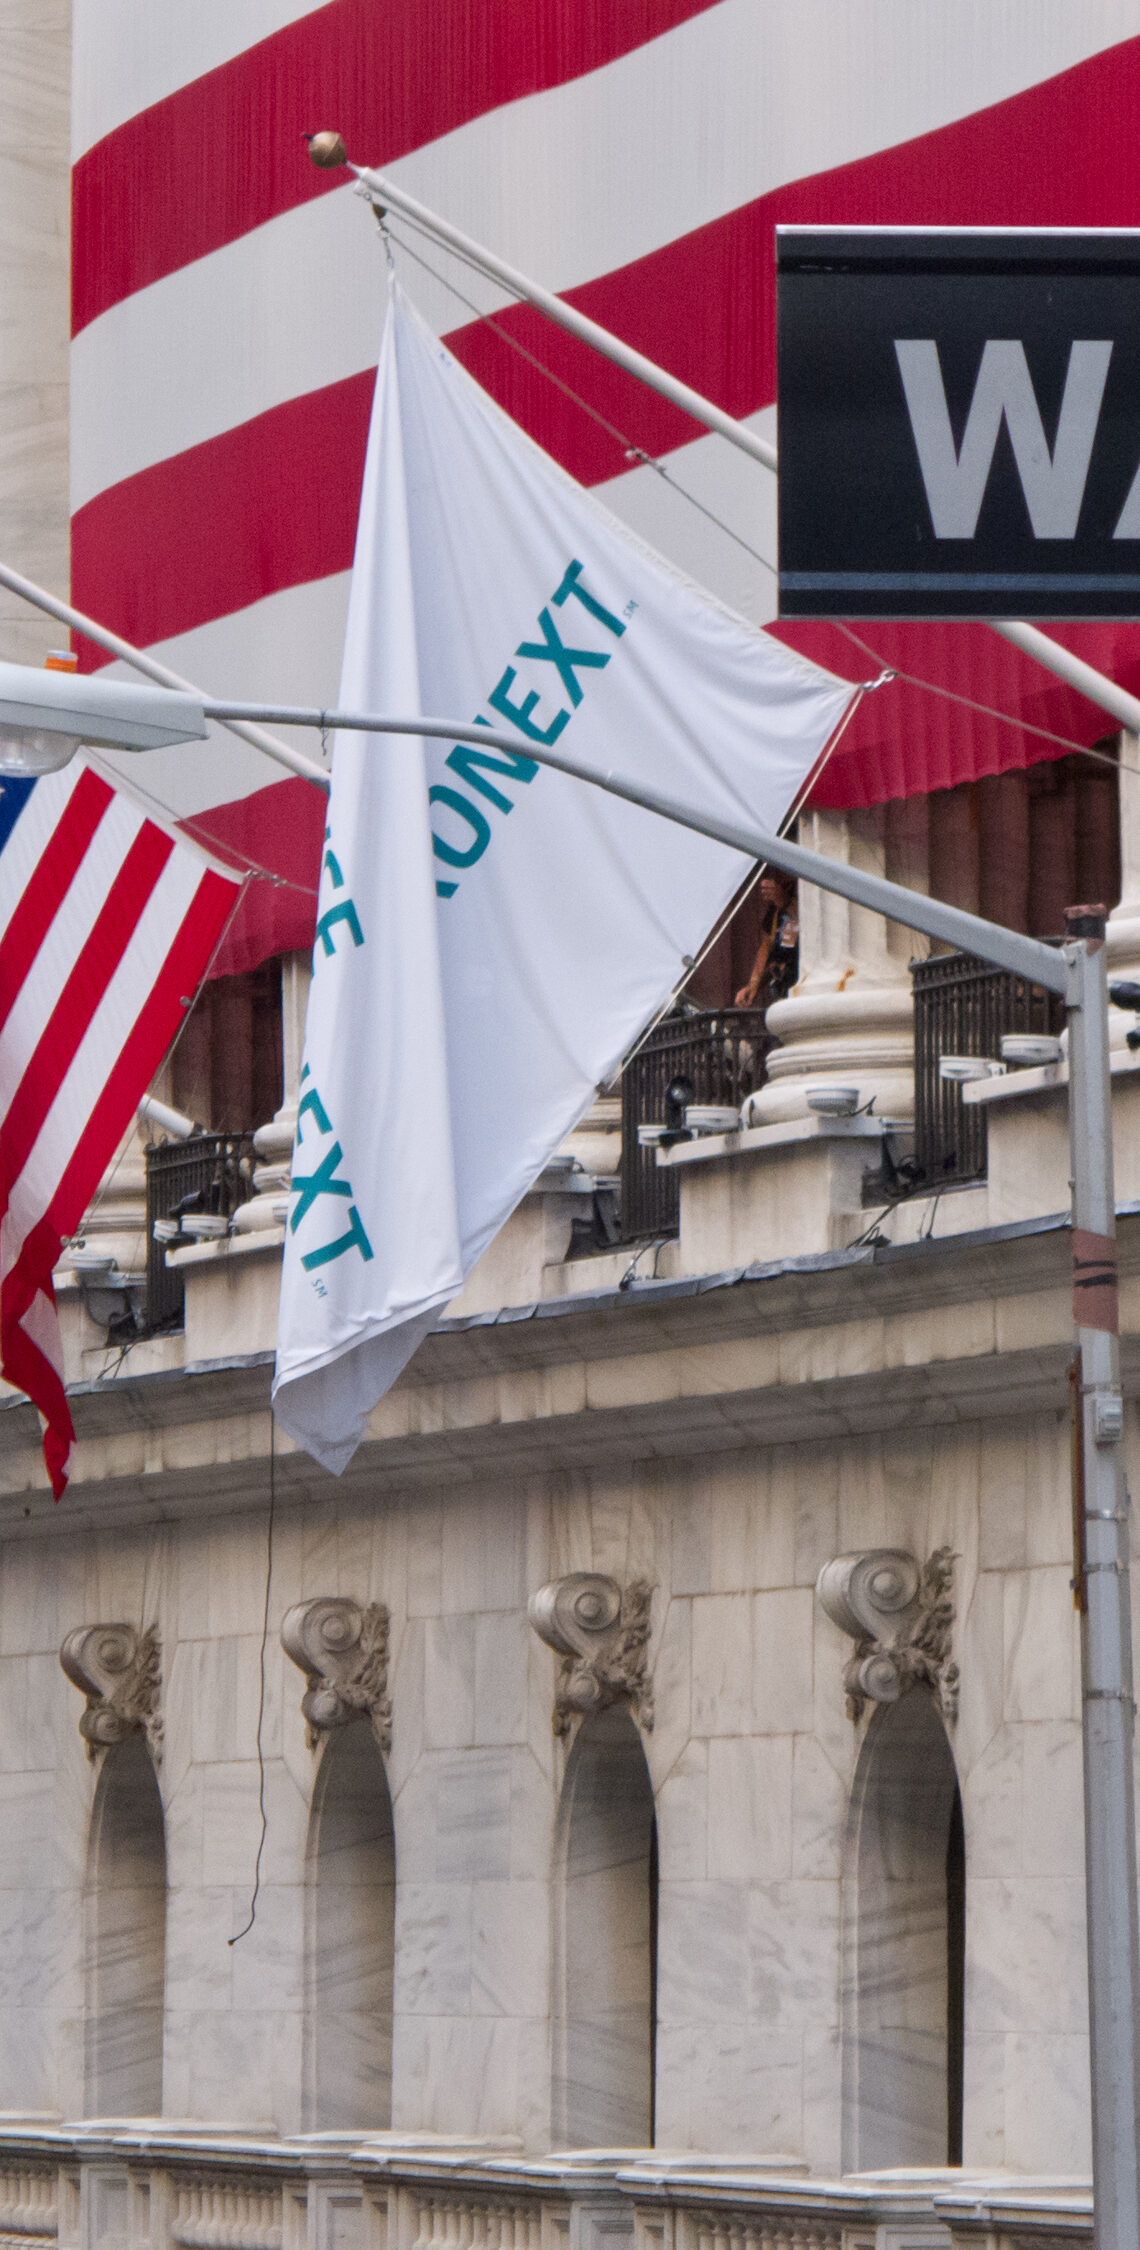 NYSE Flags